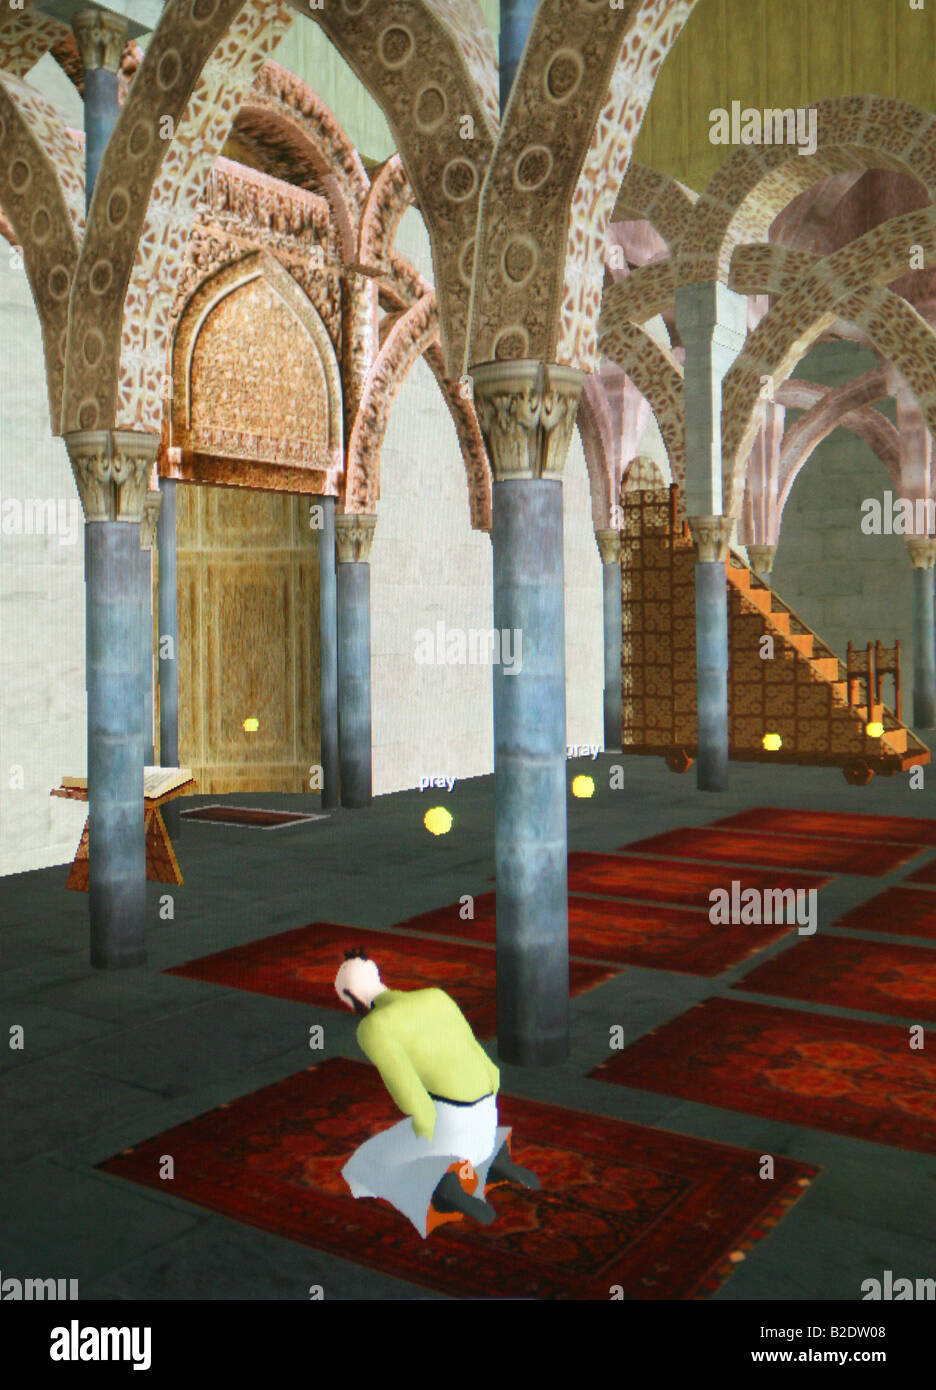 Second Life: A computer grab of a mosque from the virtual world Second Life Stock Photo